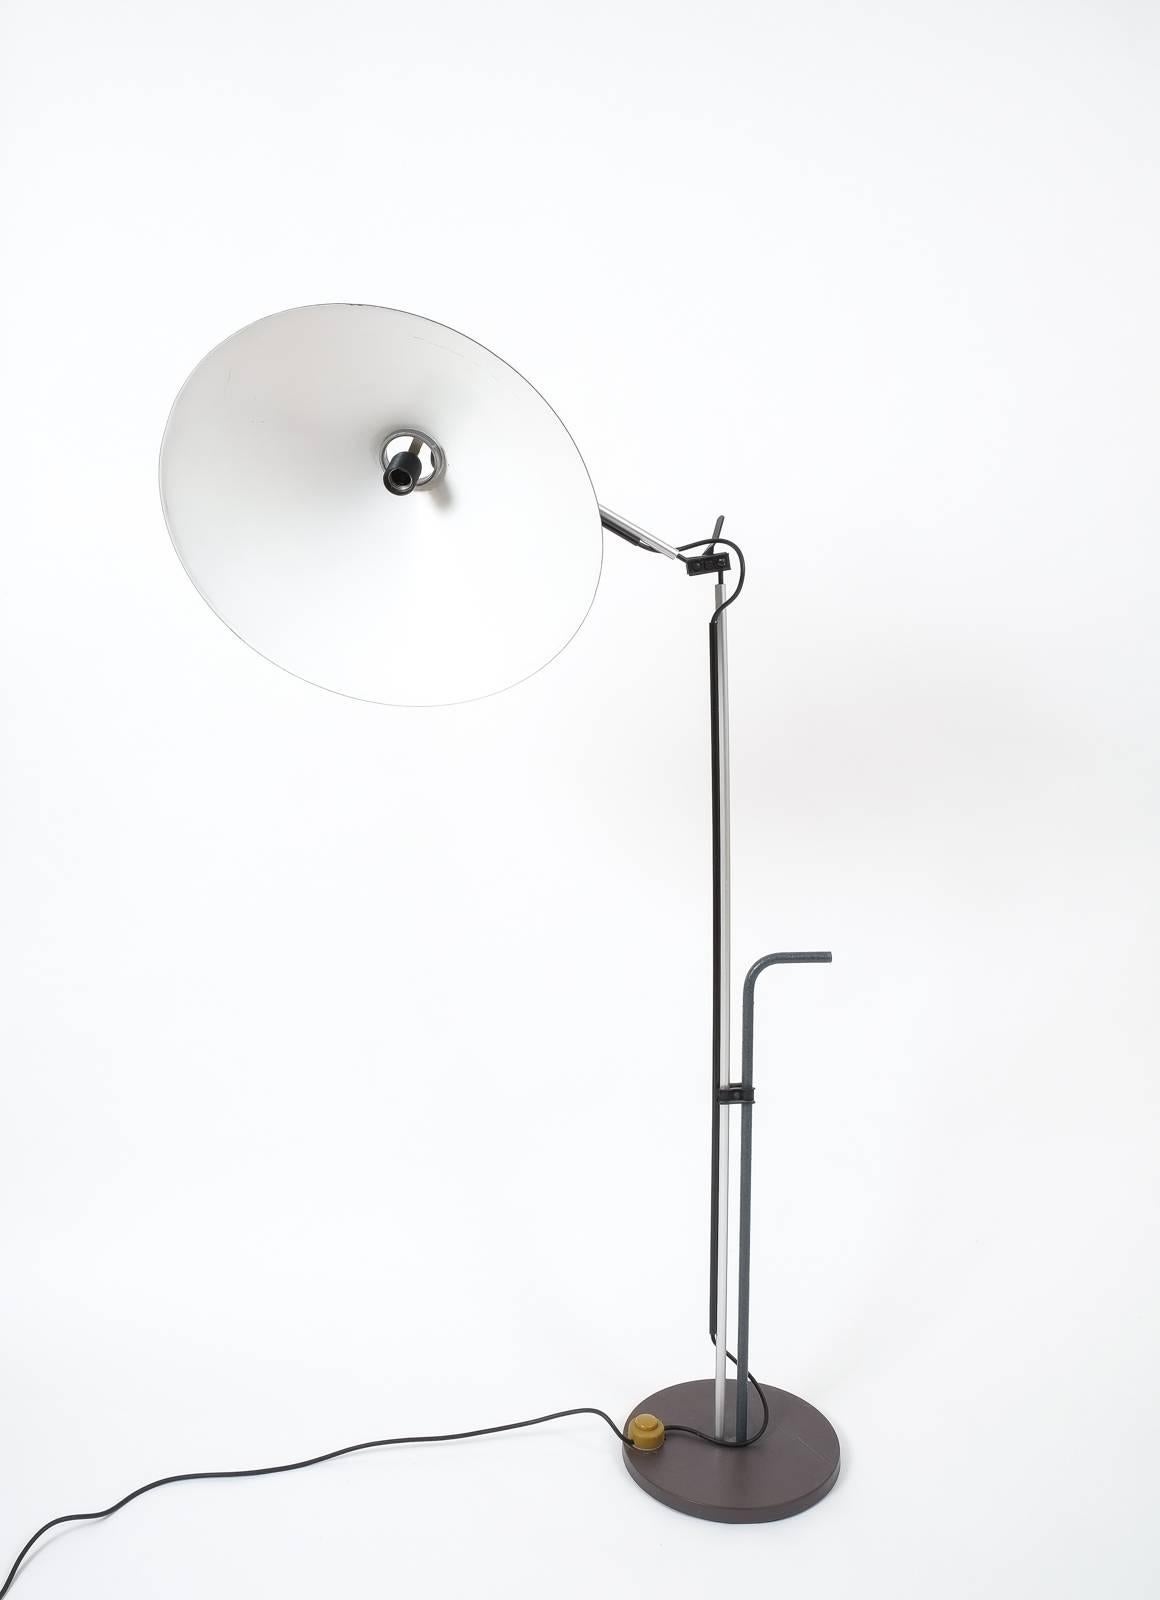 Rare early Aggregato floor lamp designed by Enzo Mari, Italy, circa 1970.
Articulate light with very flexible joints and a very large metal shade (20.86